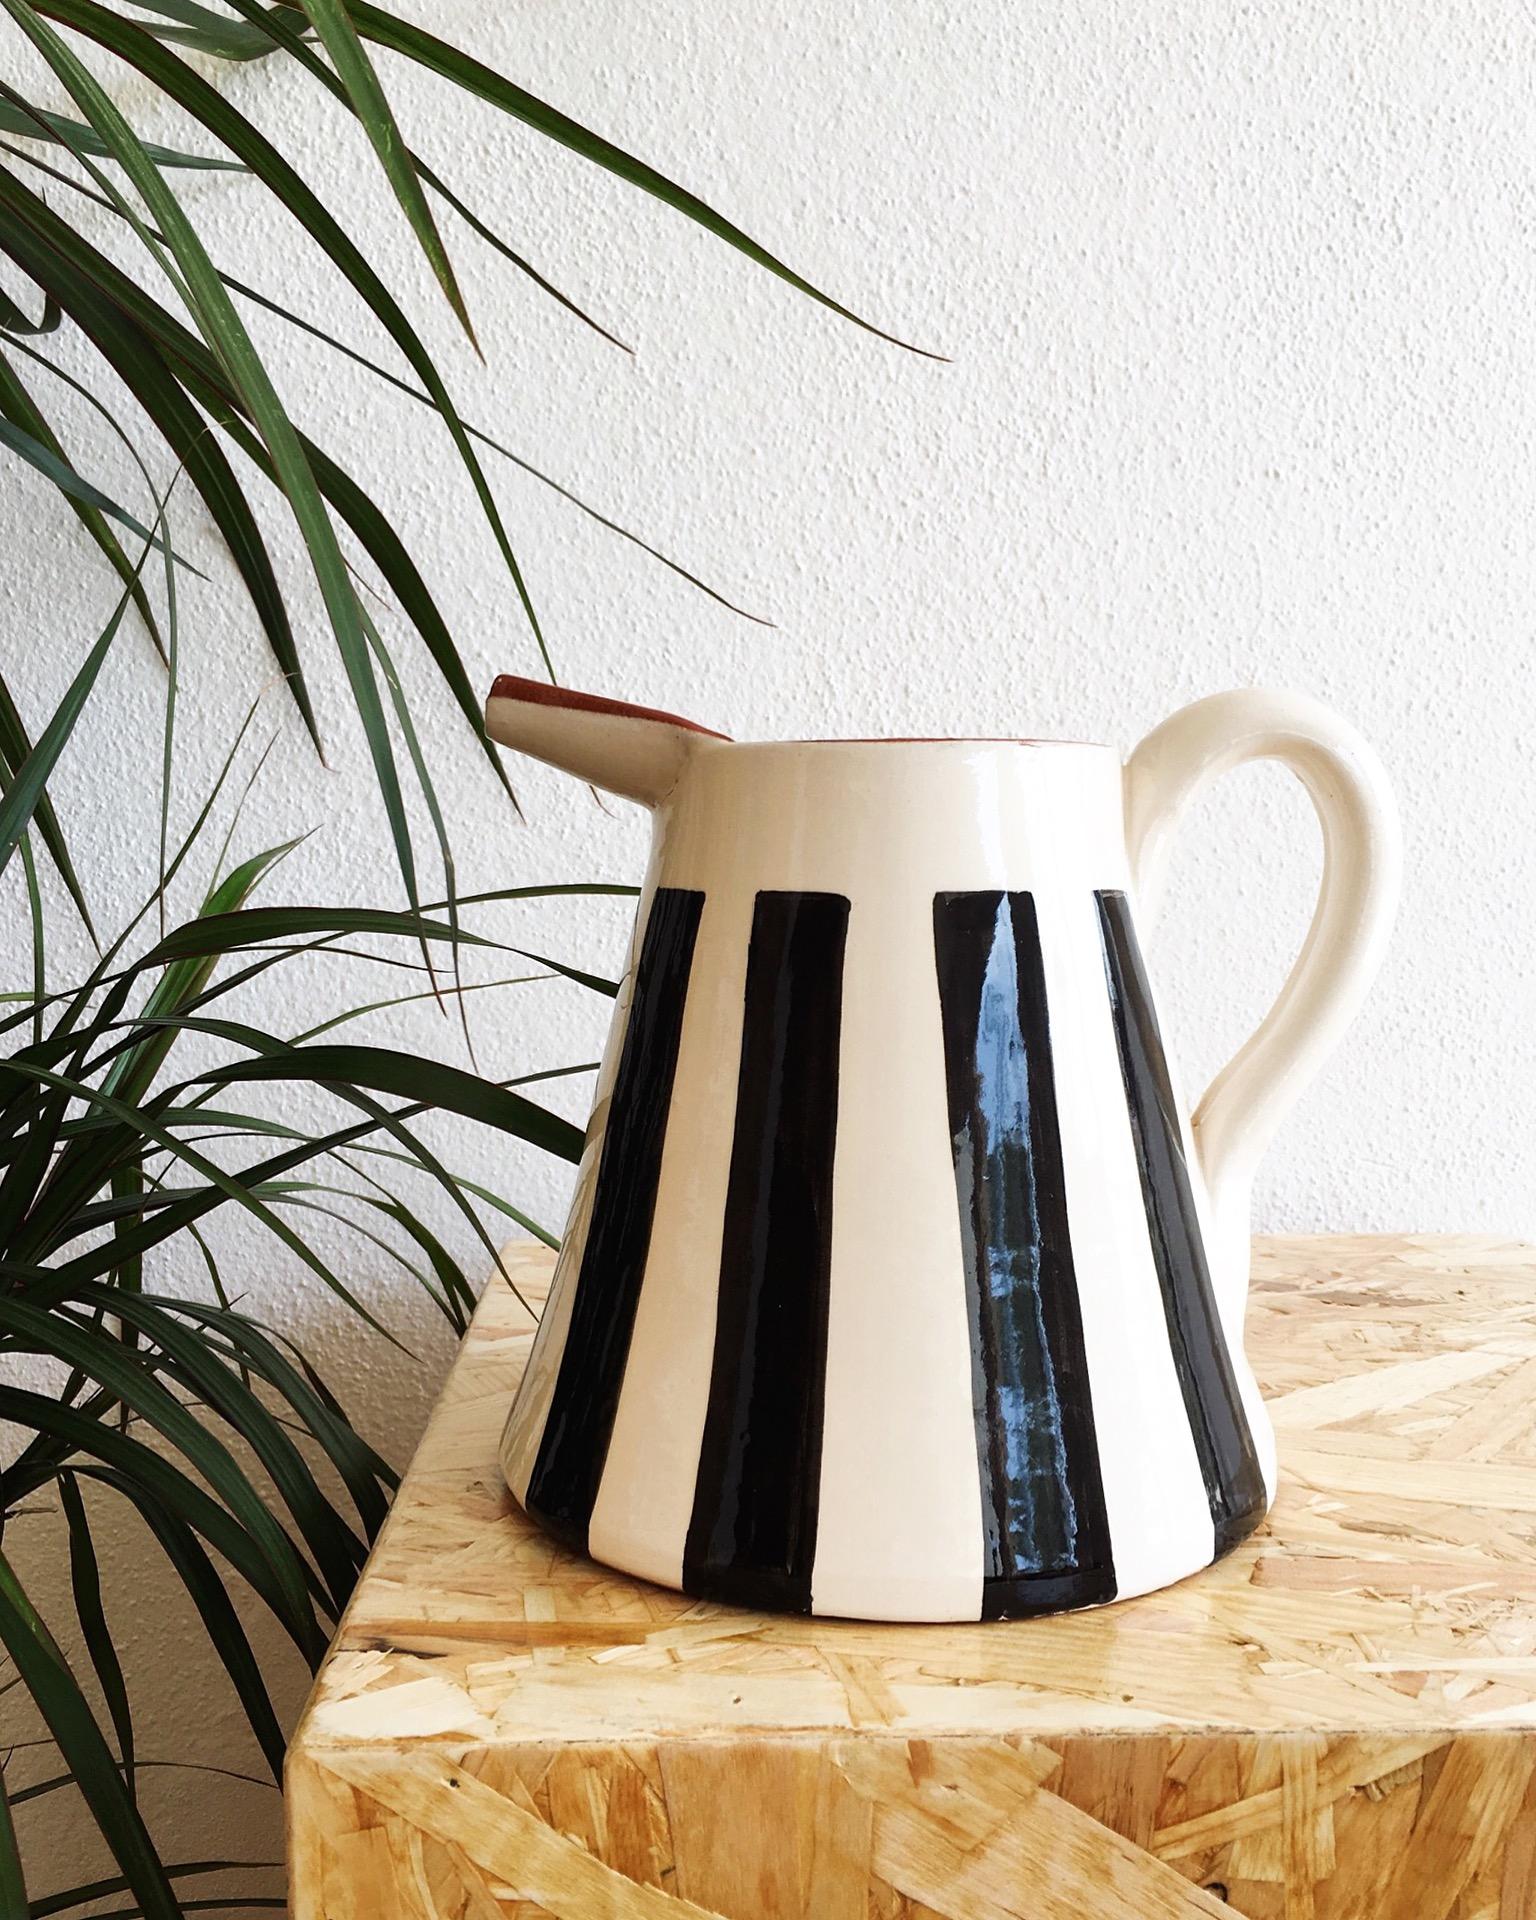 Rustic Handmade Ceramic Small Pitcher with Graphic Black and White Design, in Stock